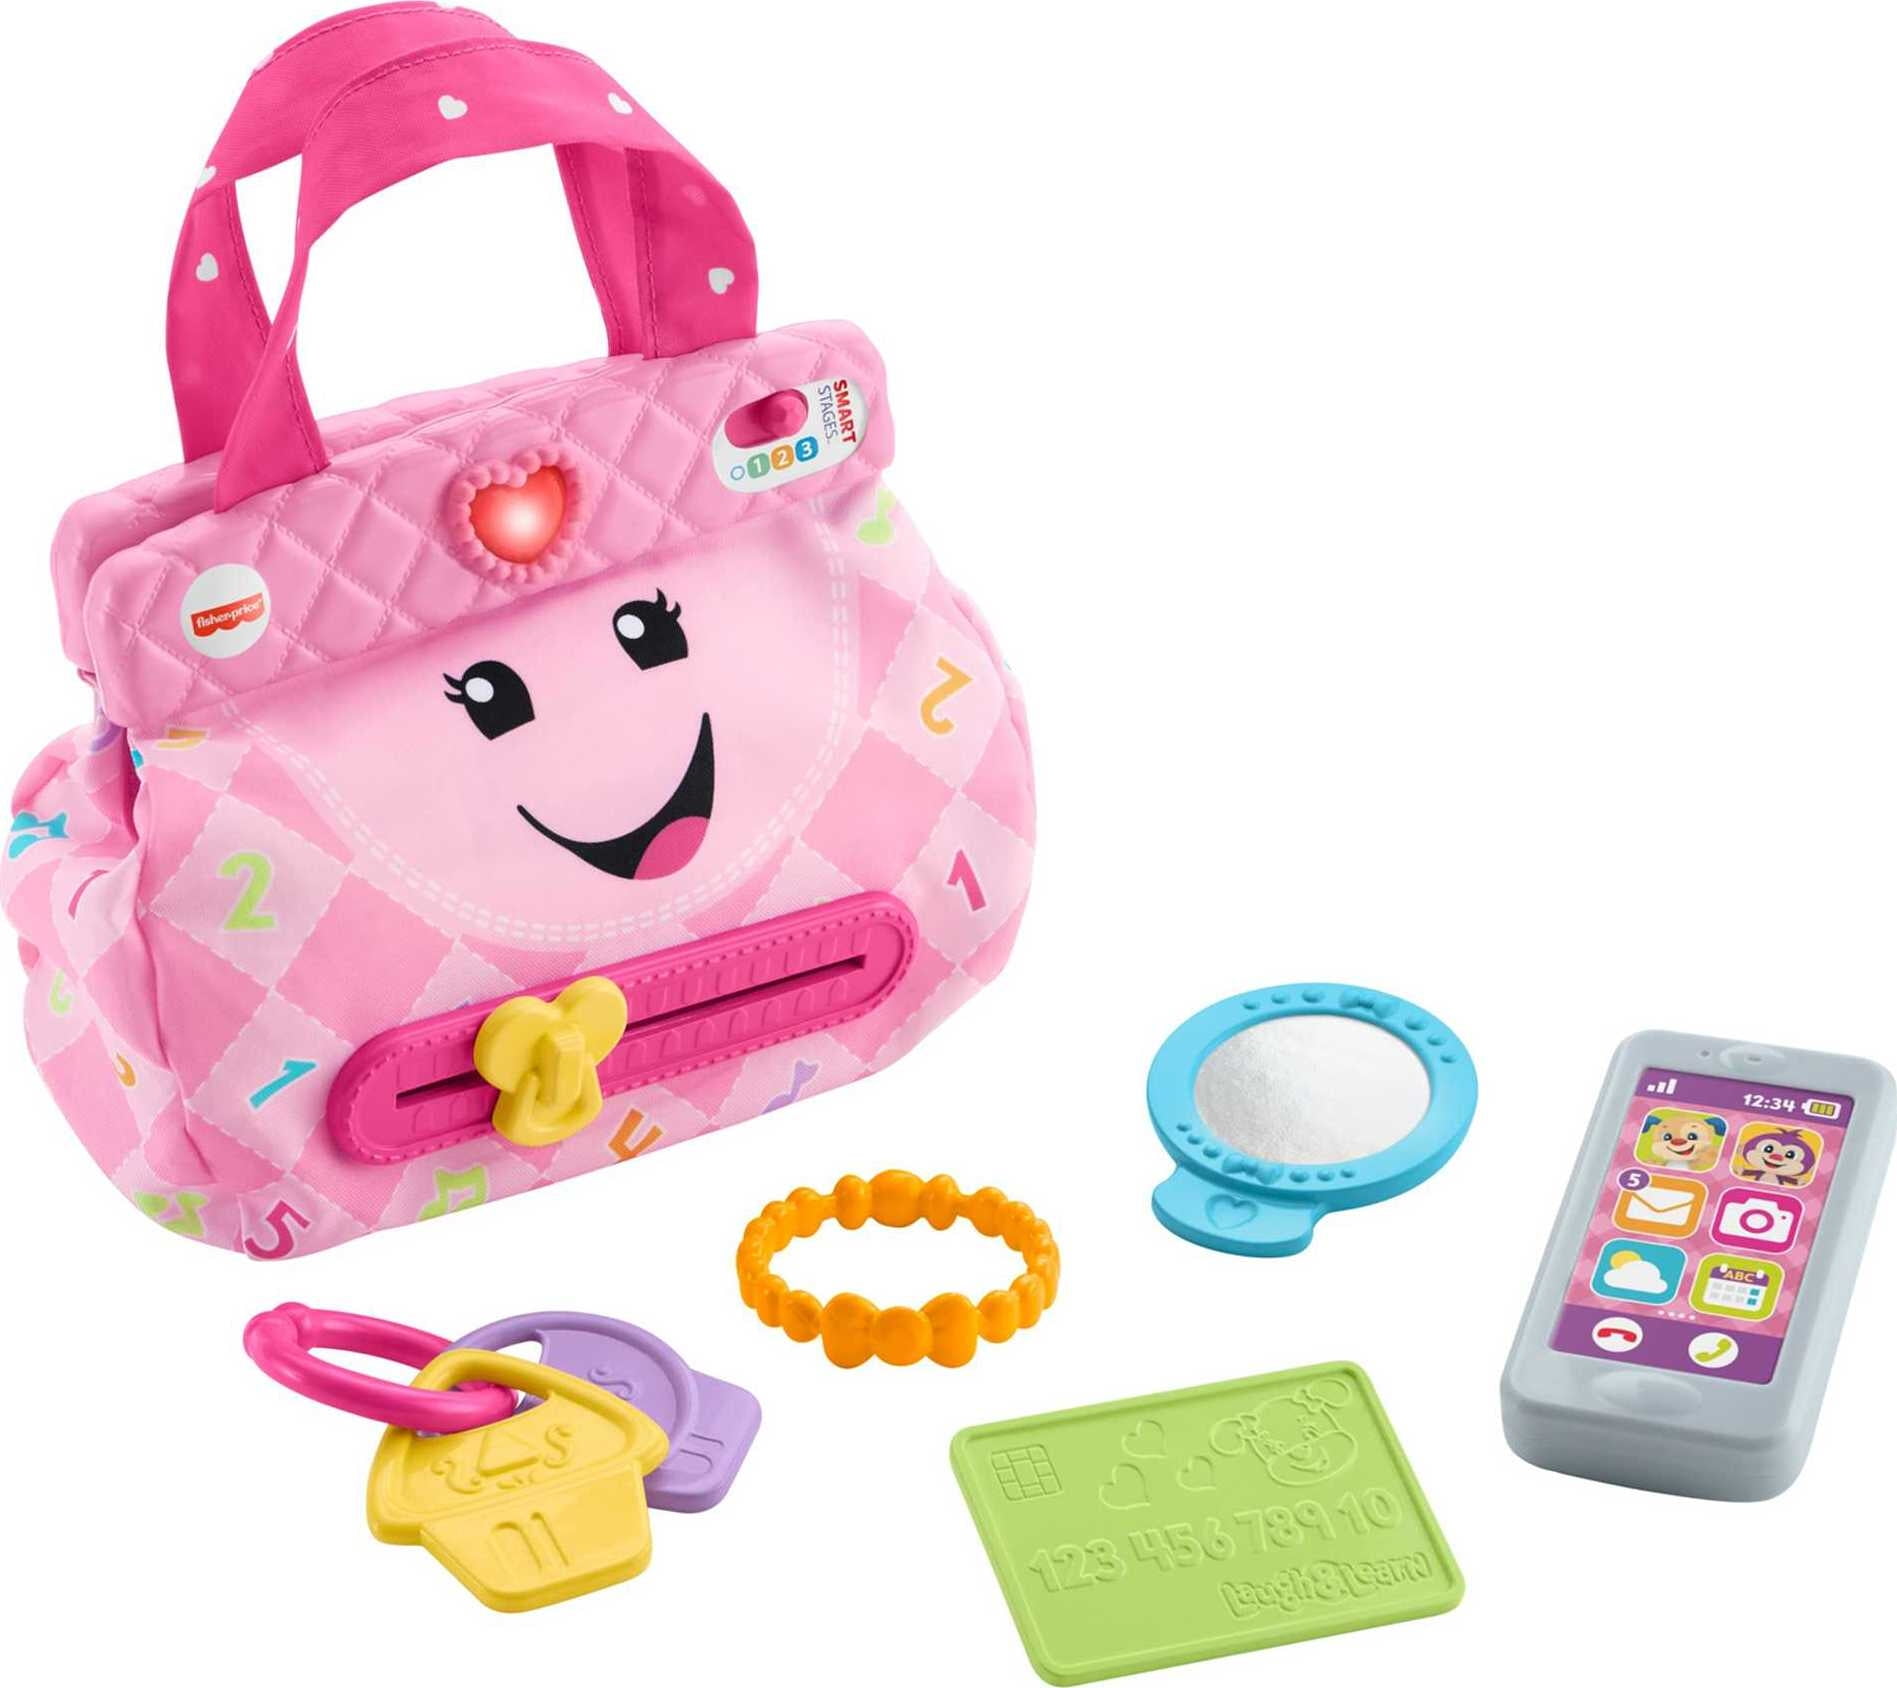 Fisher-Price Laugh & Learn My Smart Purse Infant & Toddler Learning Toy with 5 Accessories